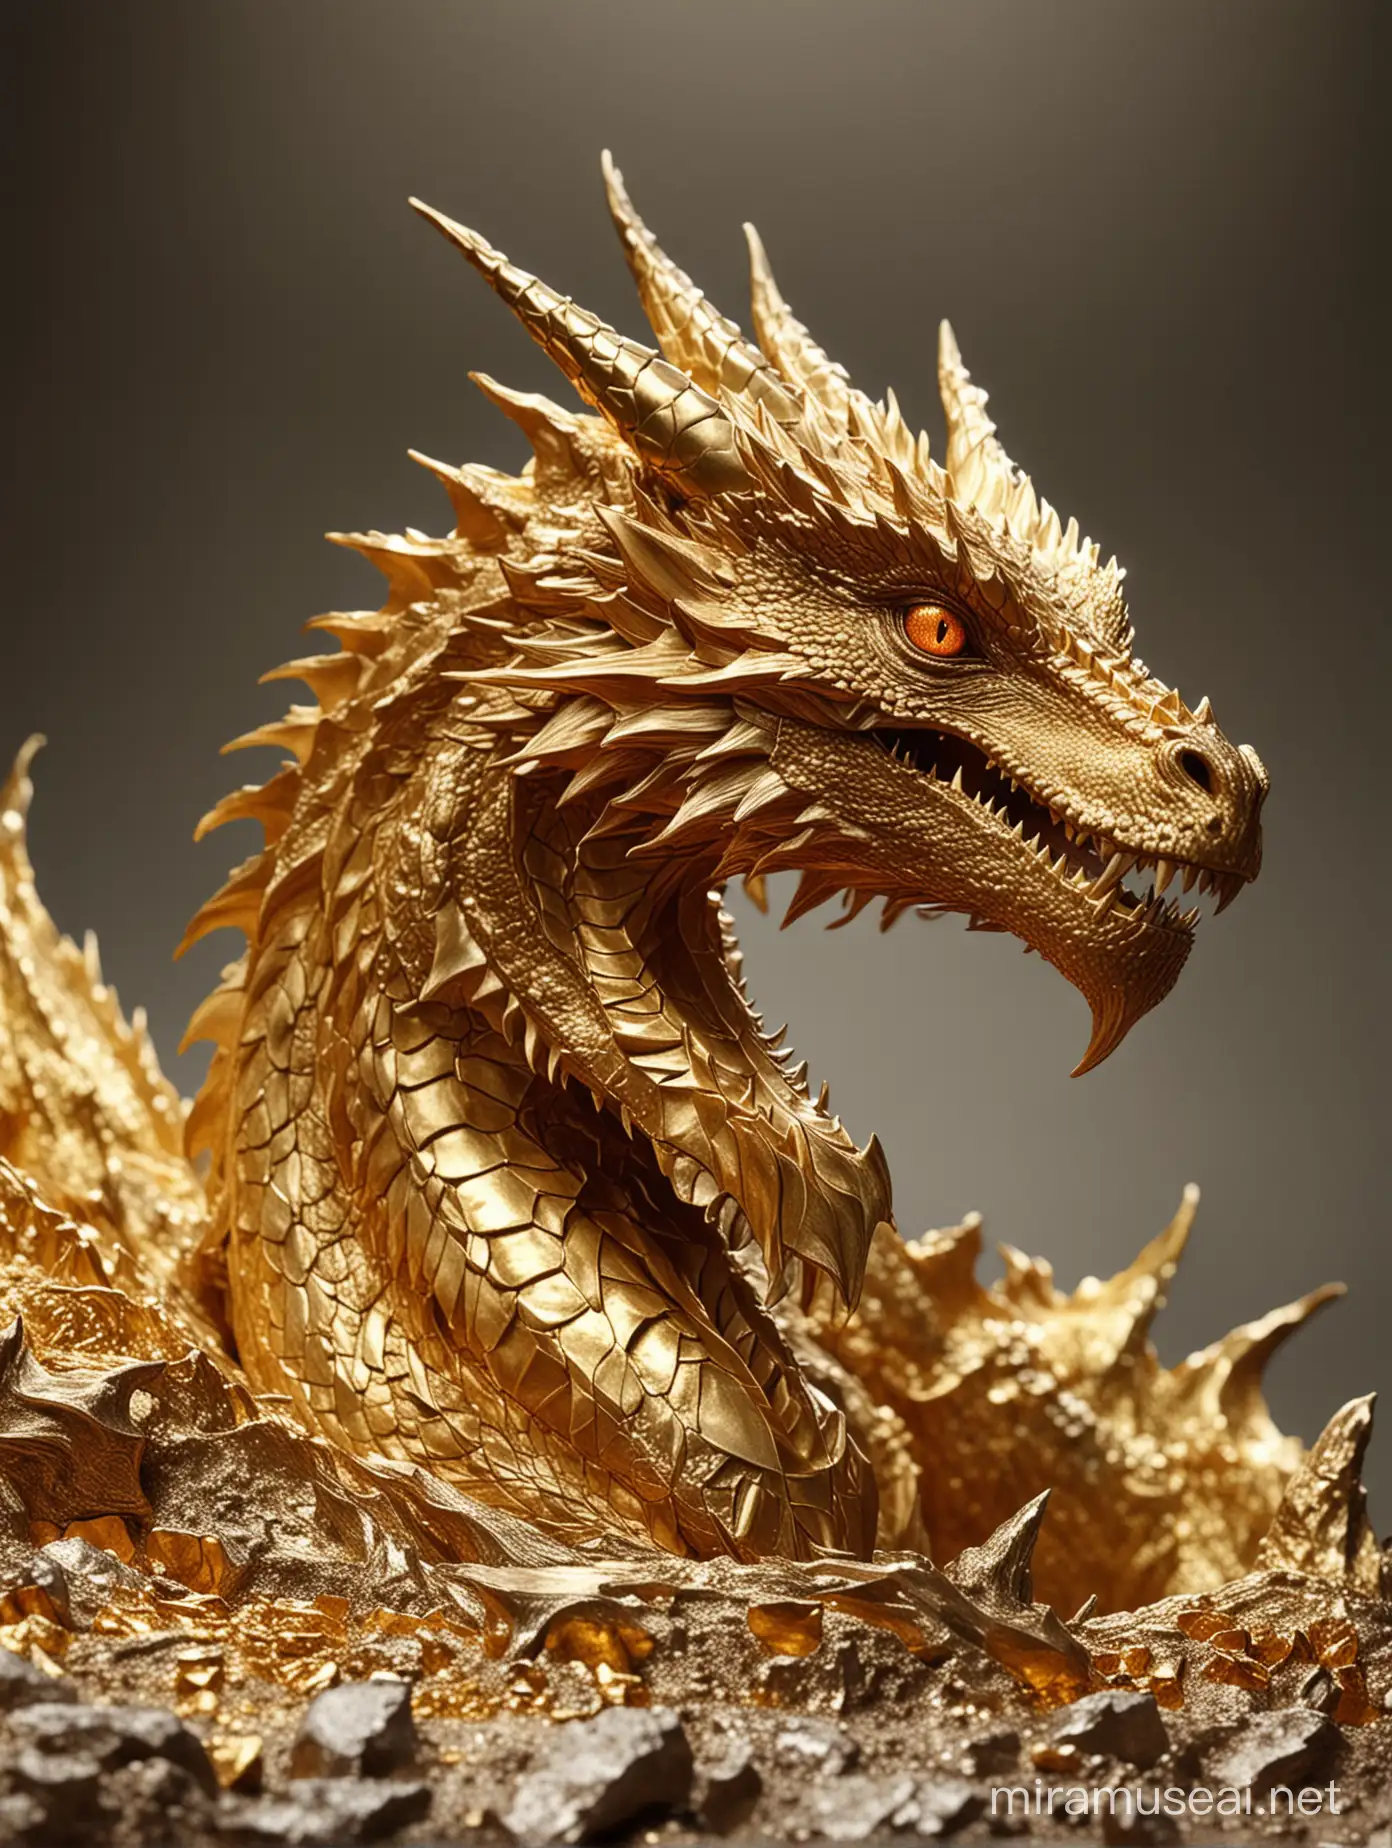 A dragon, made by Gold, looks like Smaug